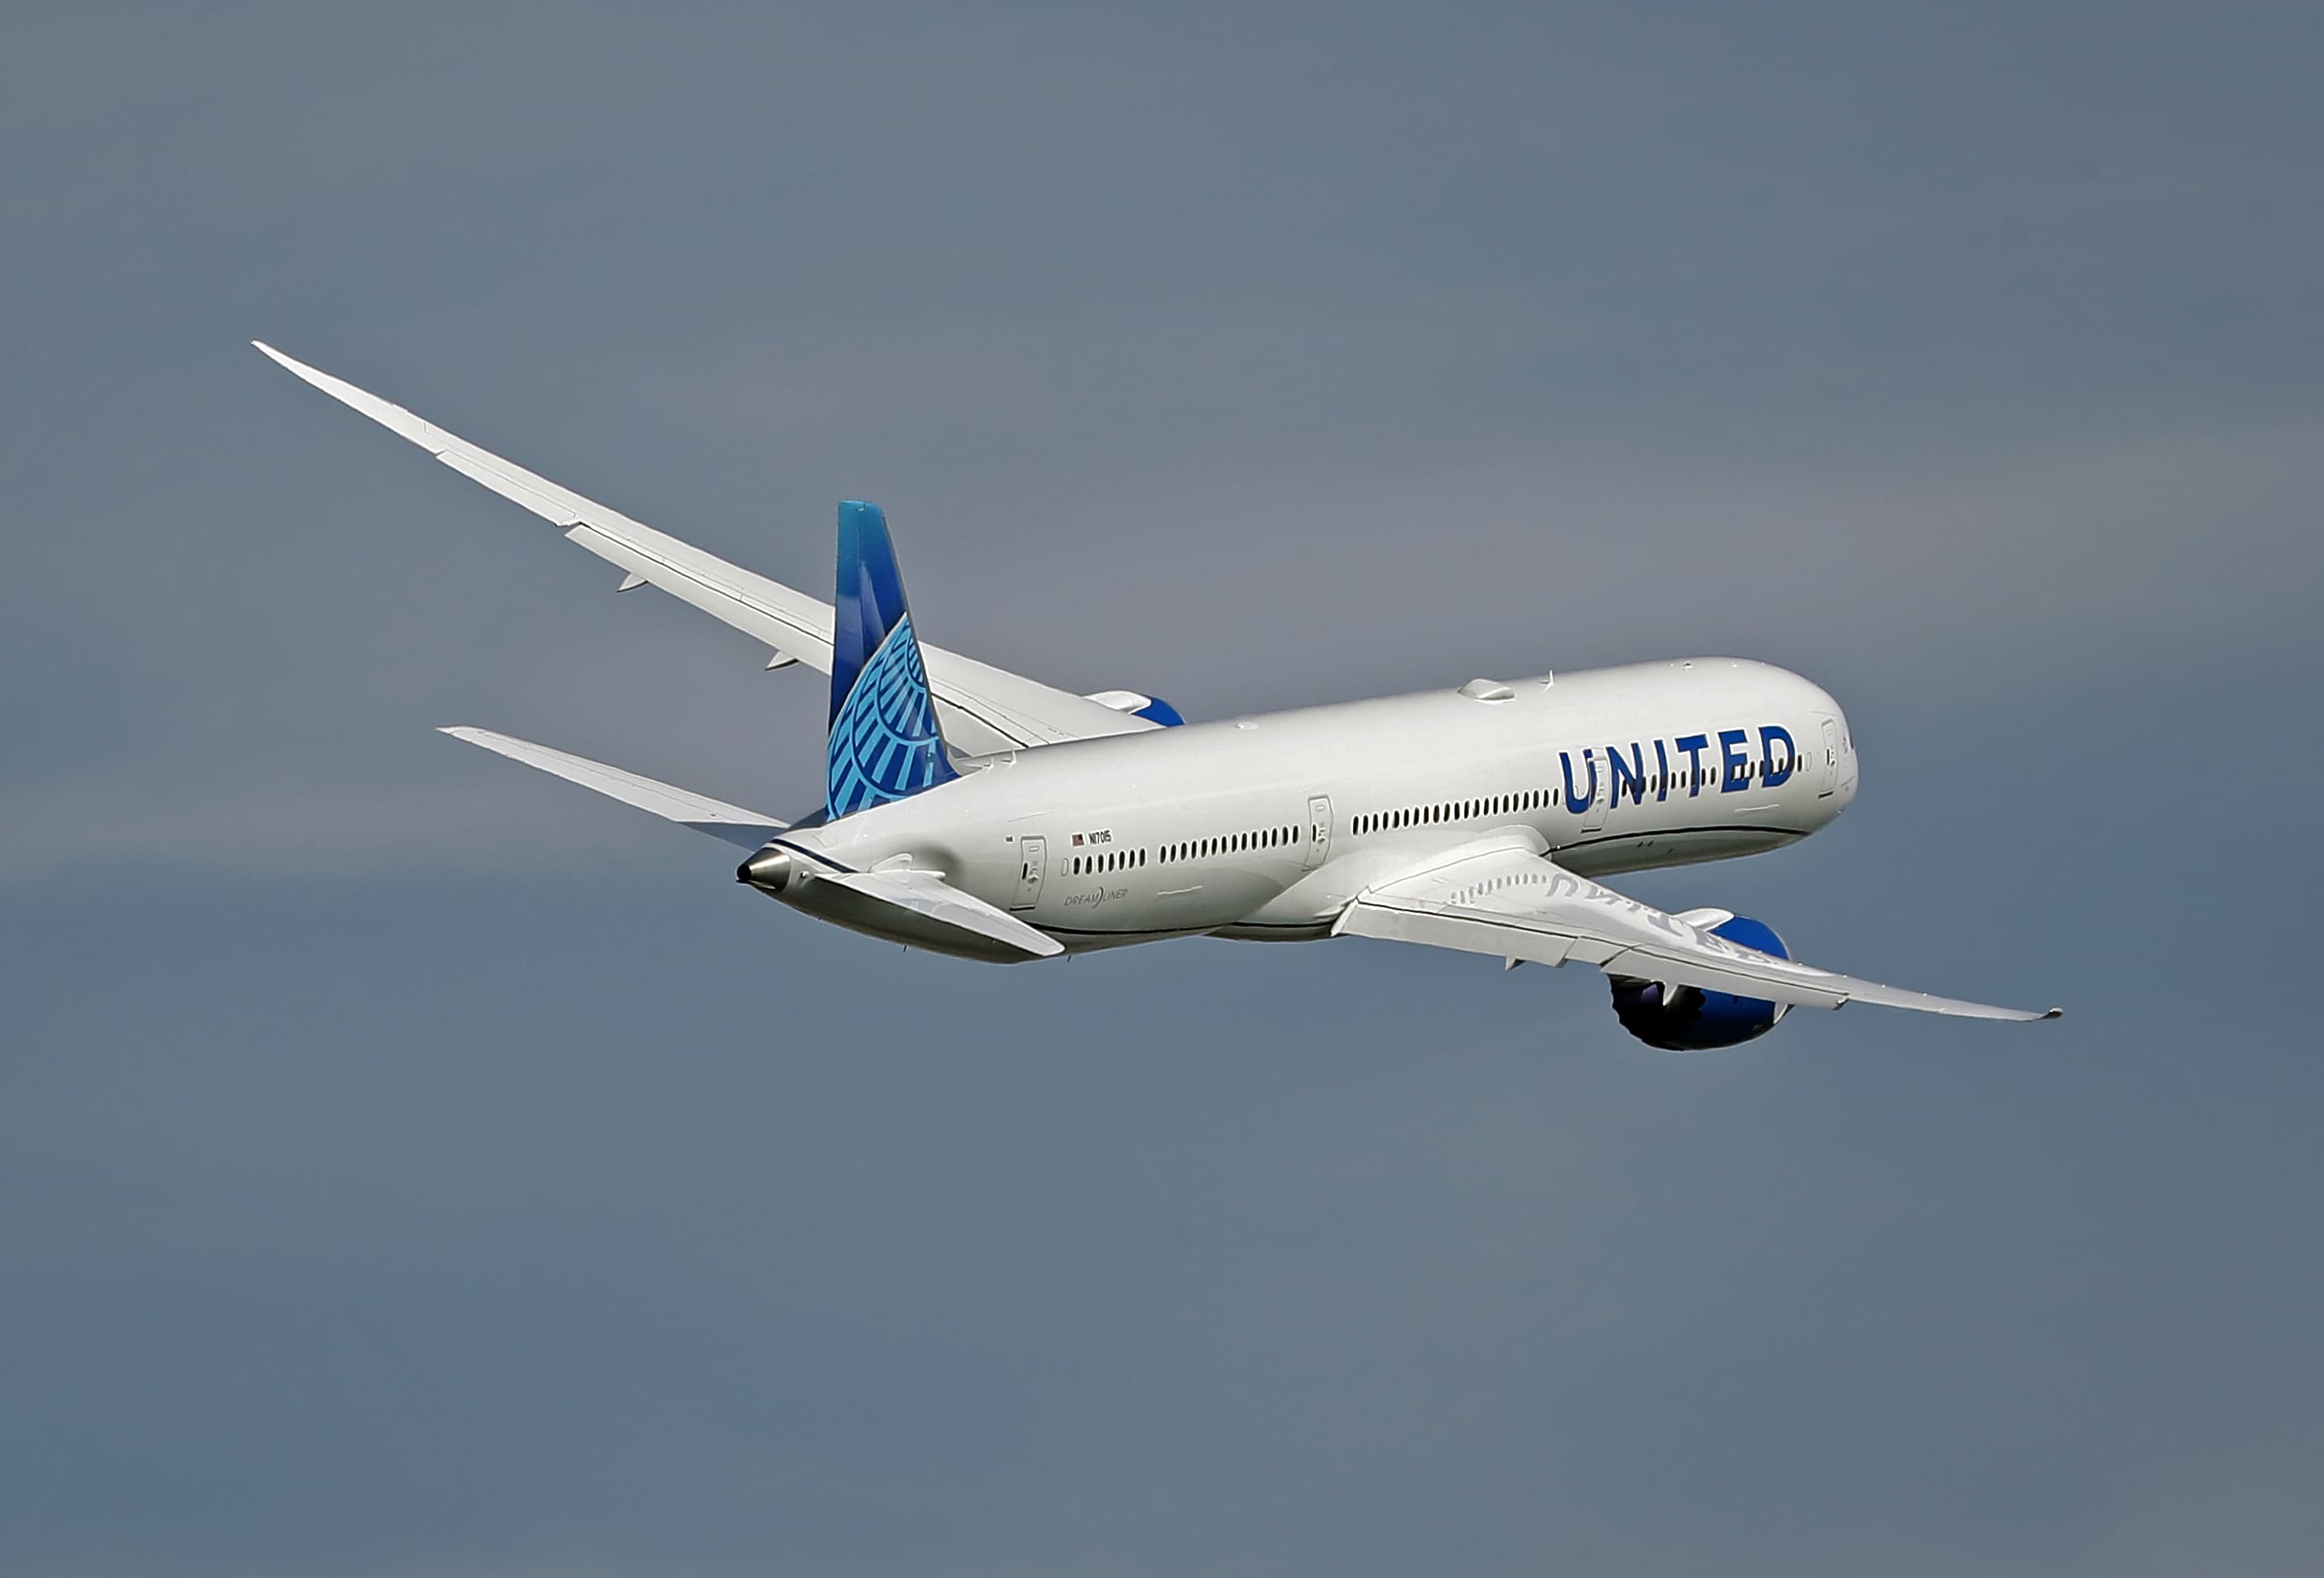 United is asking pilots to take unpaid leave, due to Boeing delays